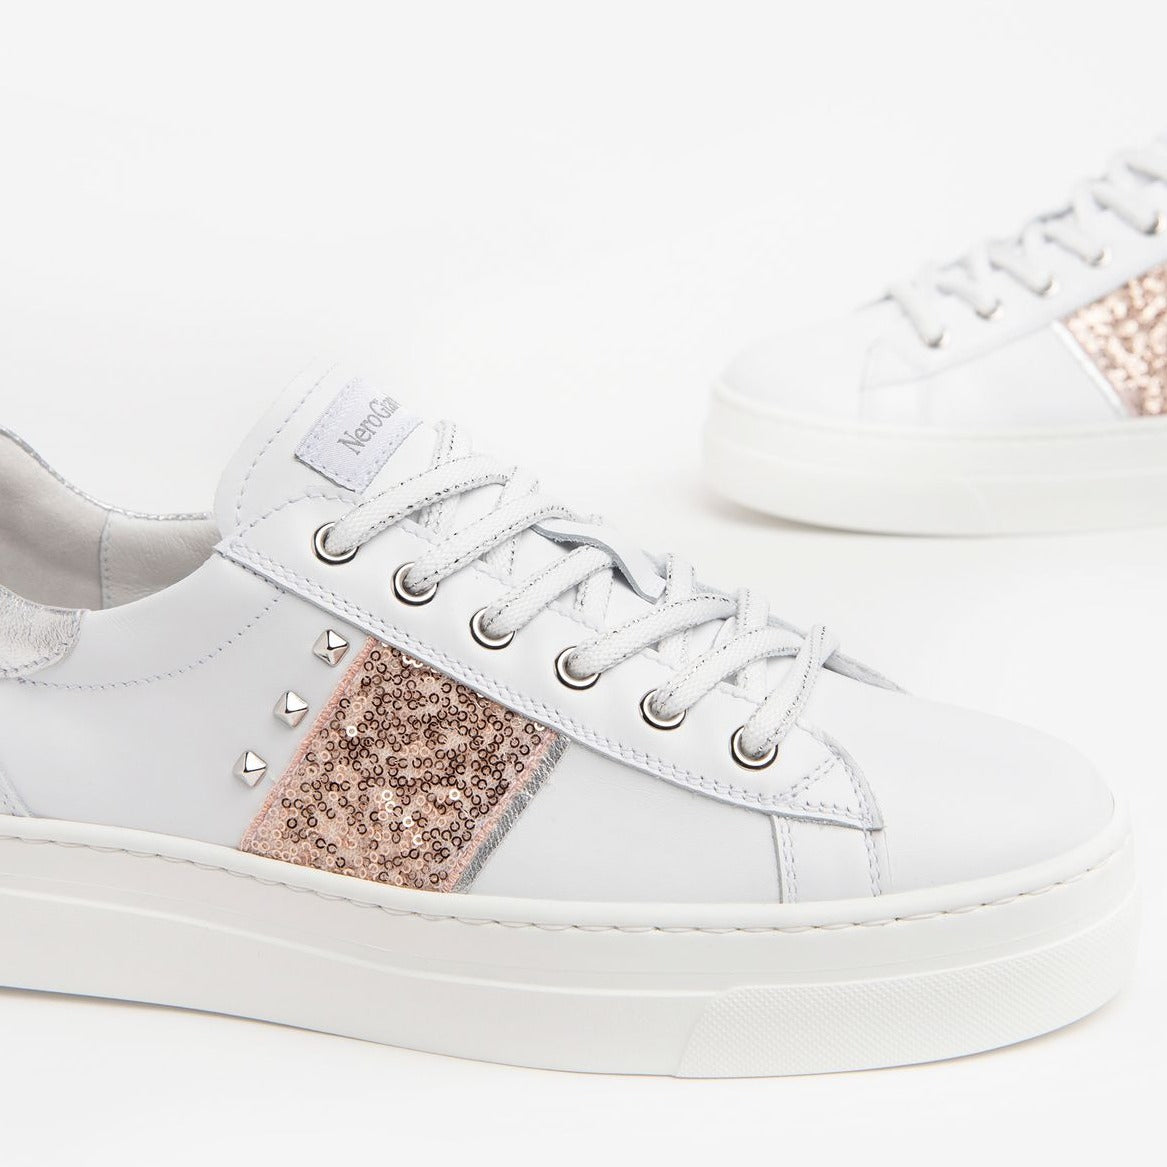 Sneakers NeroGiardini woman white leather pink applications